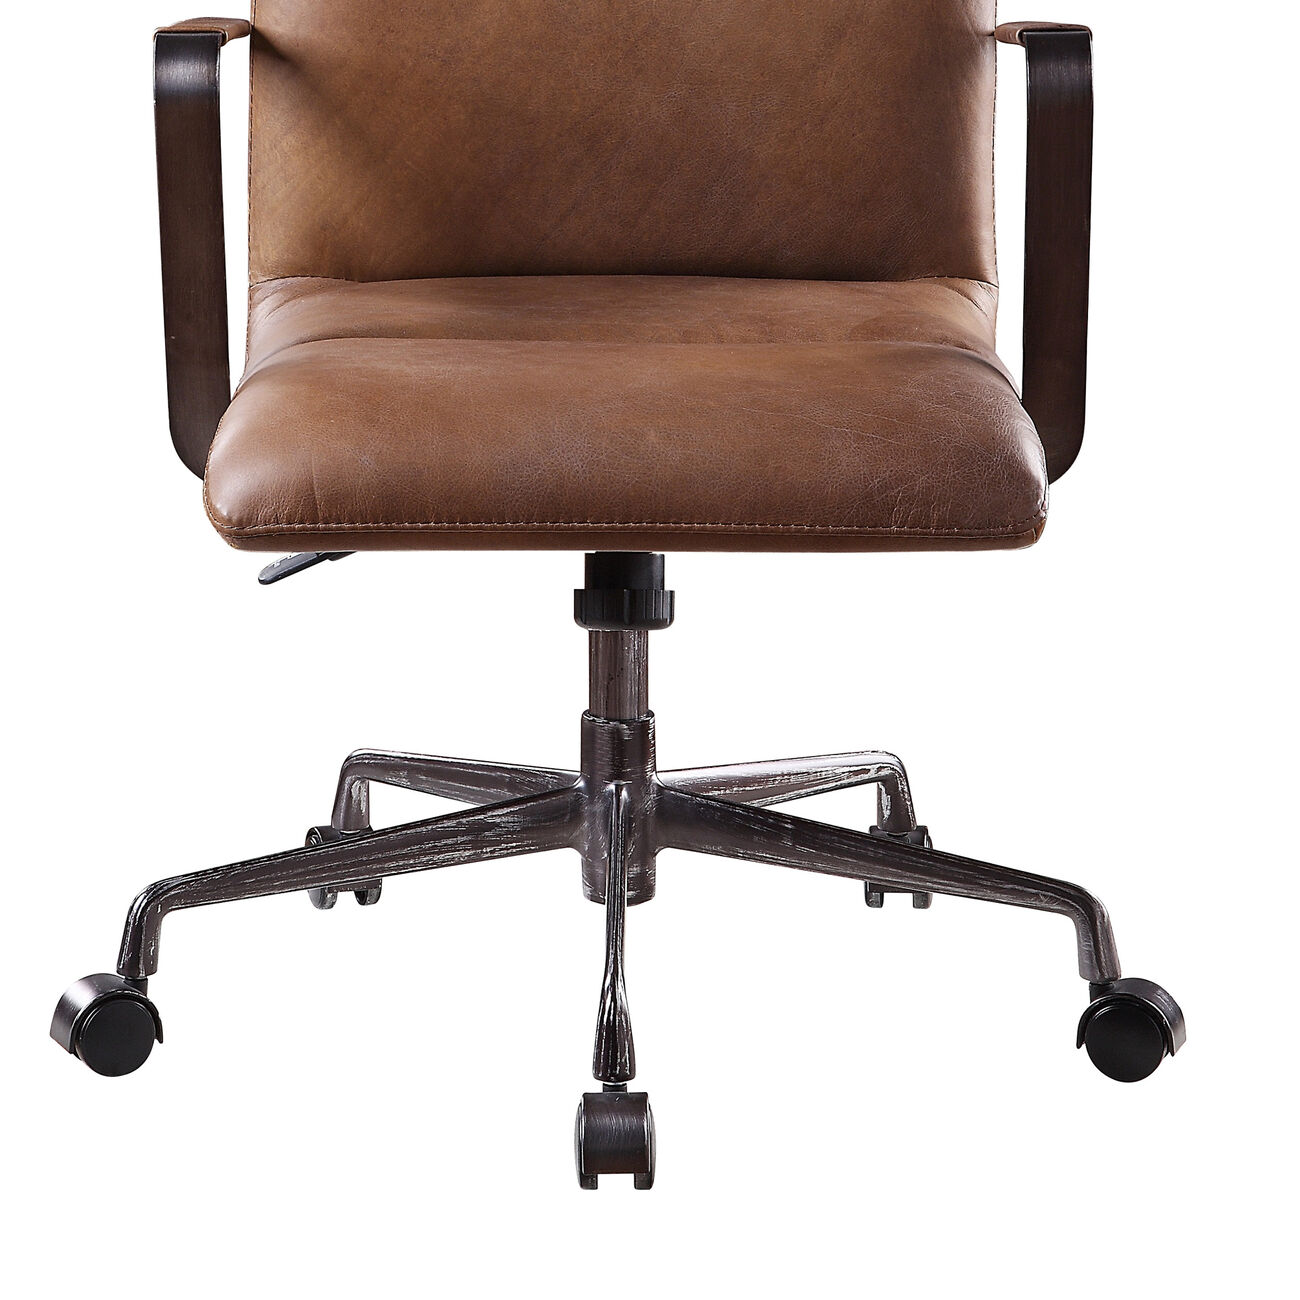 5 Star Base Faux Leather Upholstered Wooden Office Chair , Brown